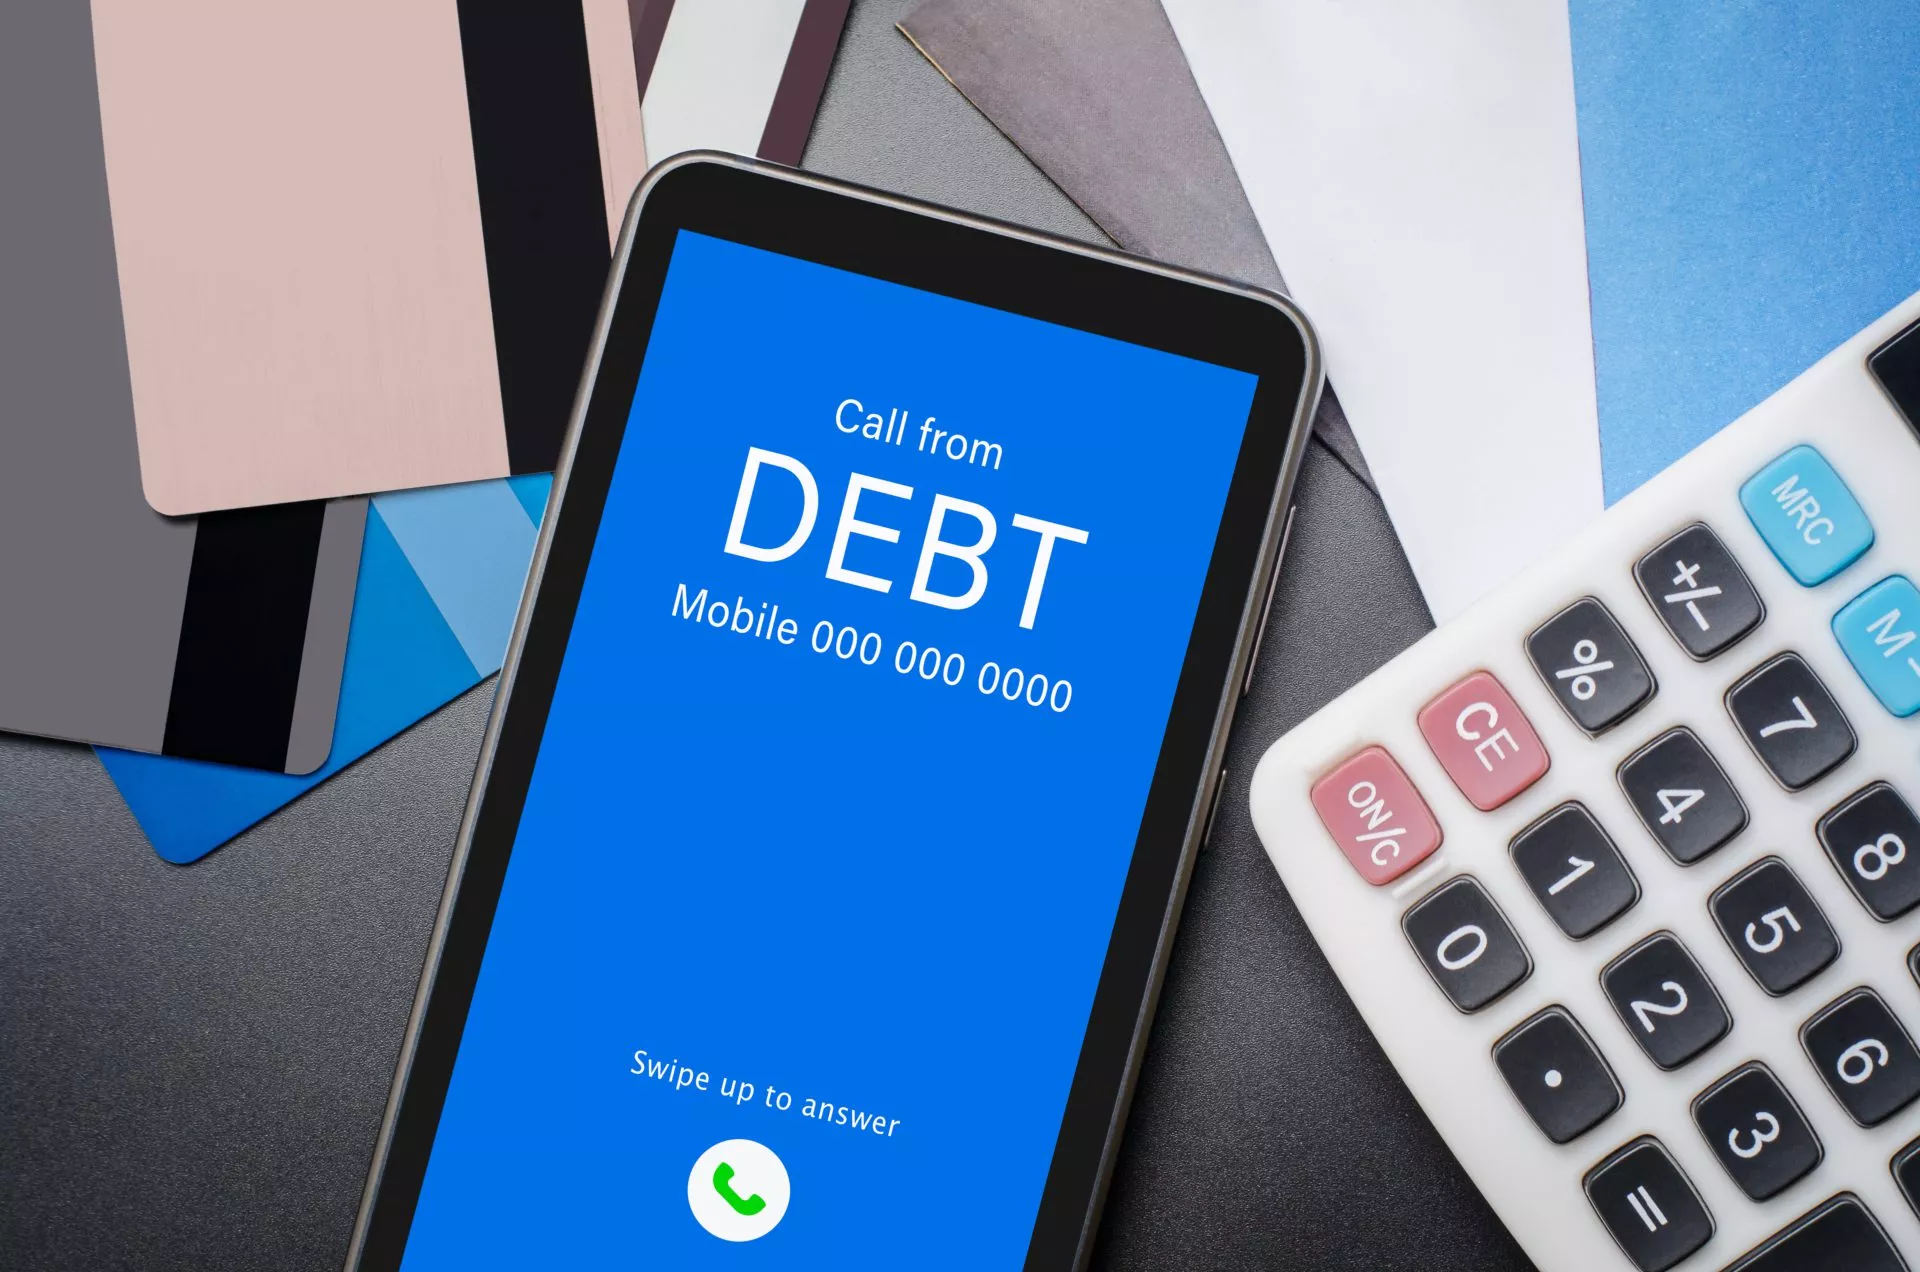 Call from Debt